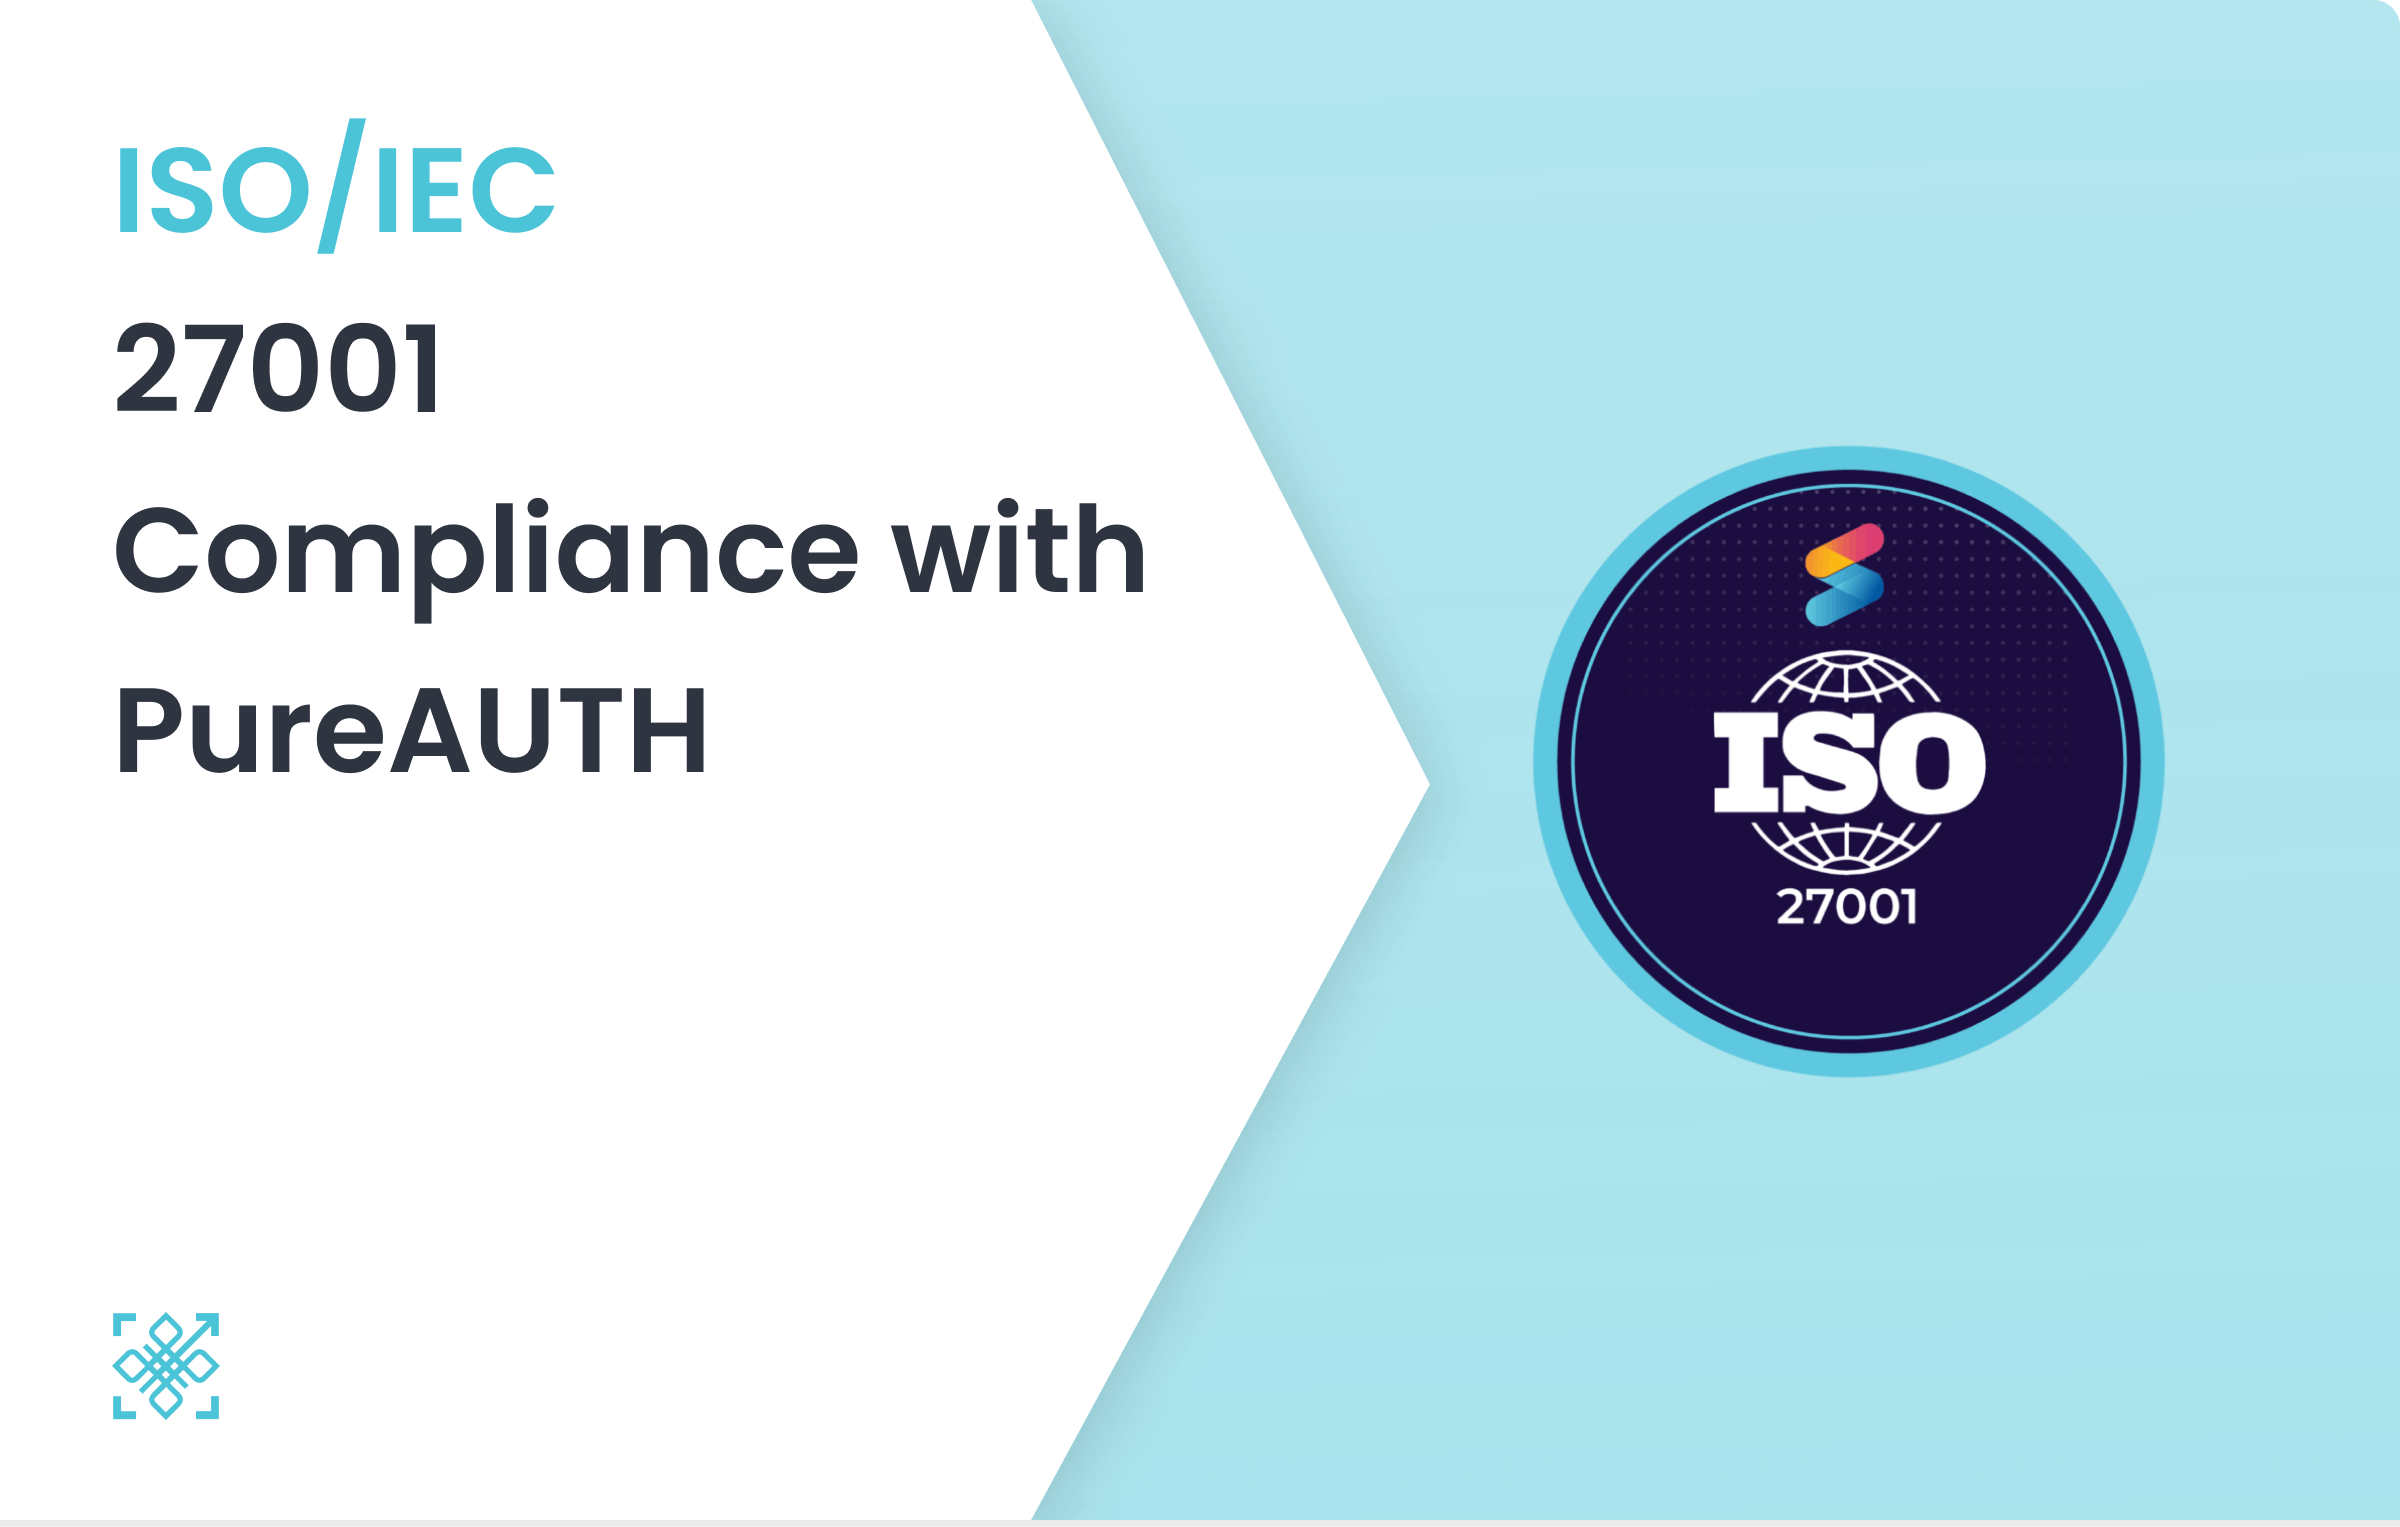 ISO/IEC 27001 Compliance with PureAUTH